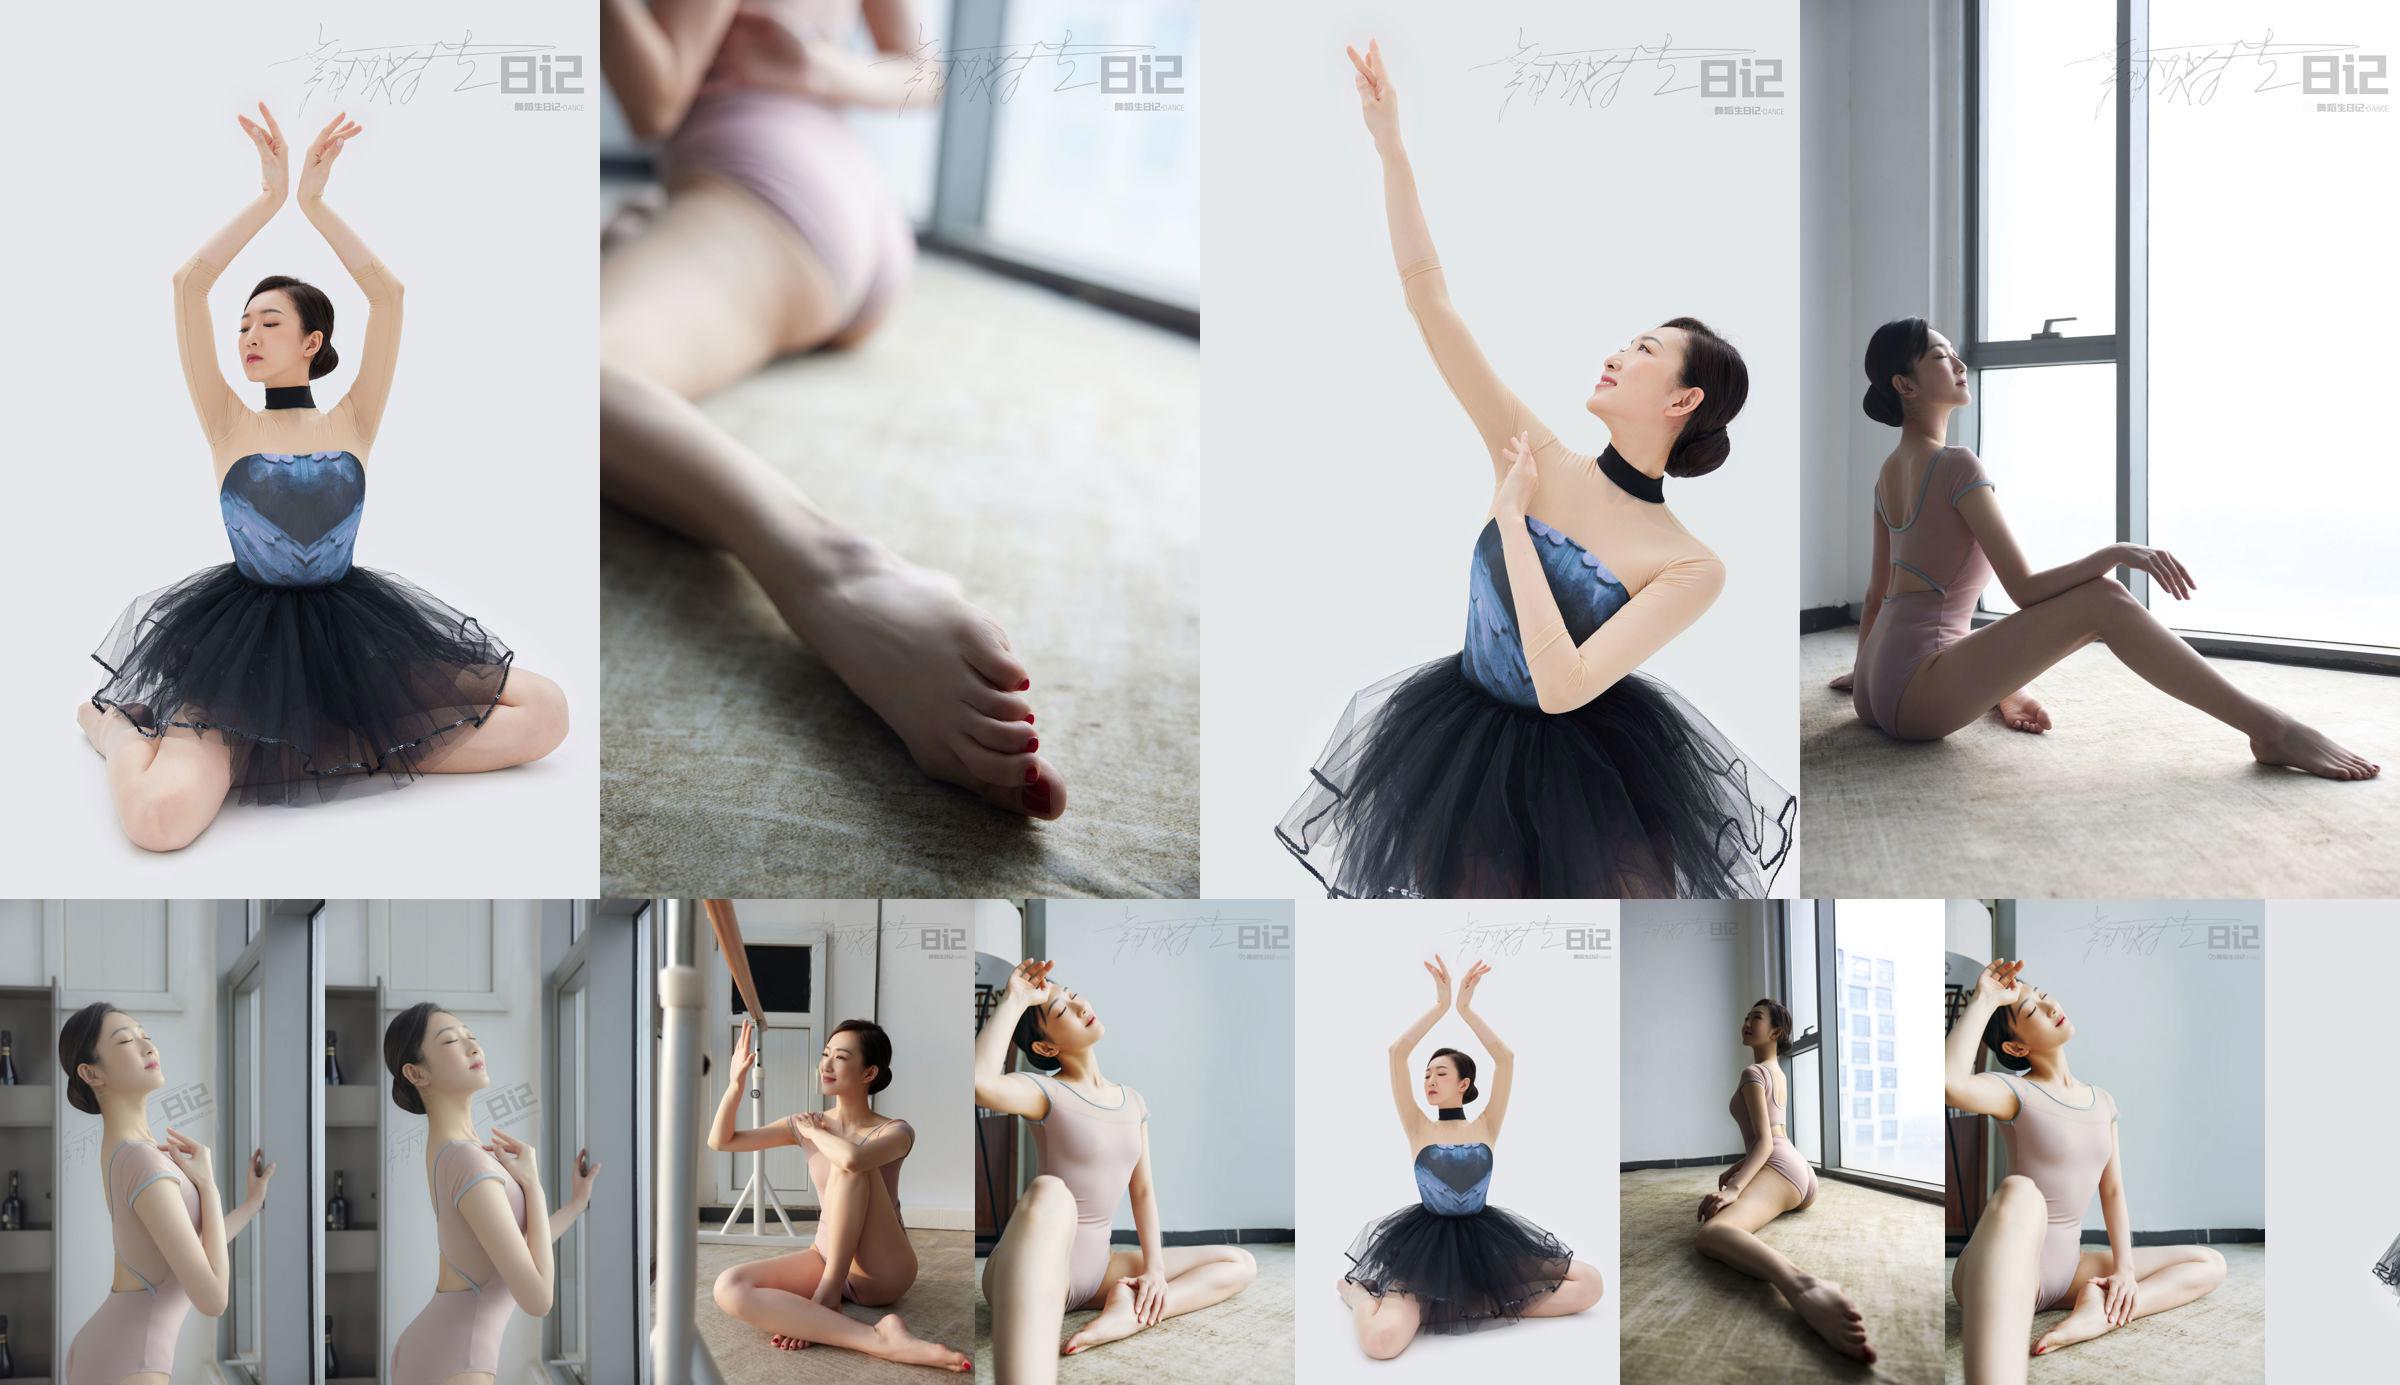 [GALLI Jiali] Diary of a Dance Student 059 Dong Dong No.6705fd หน้า 1